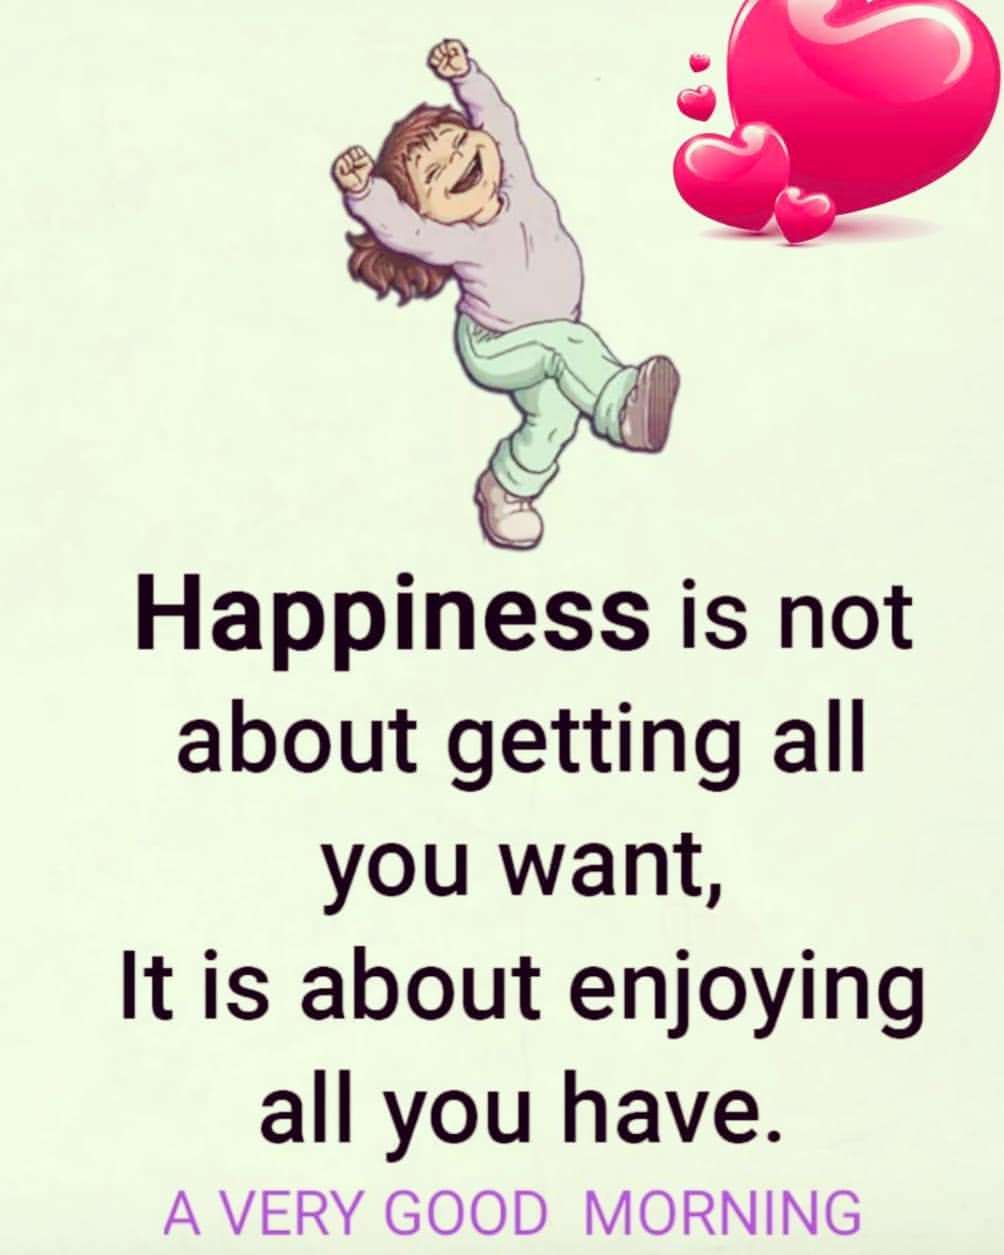 Quotes Happiness is not about getting all you want, it is about enjoying  all you have.